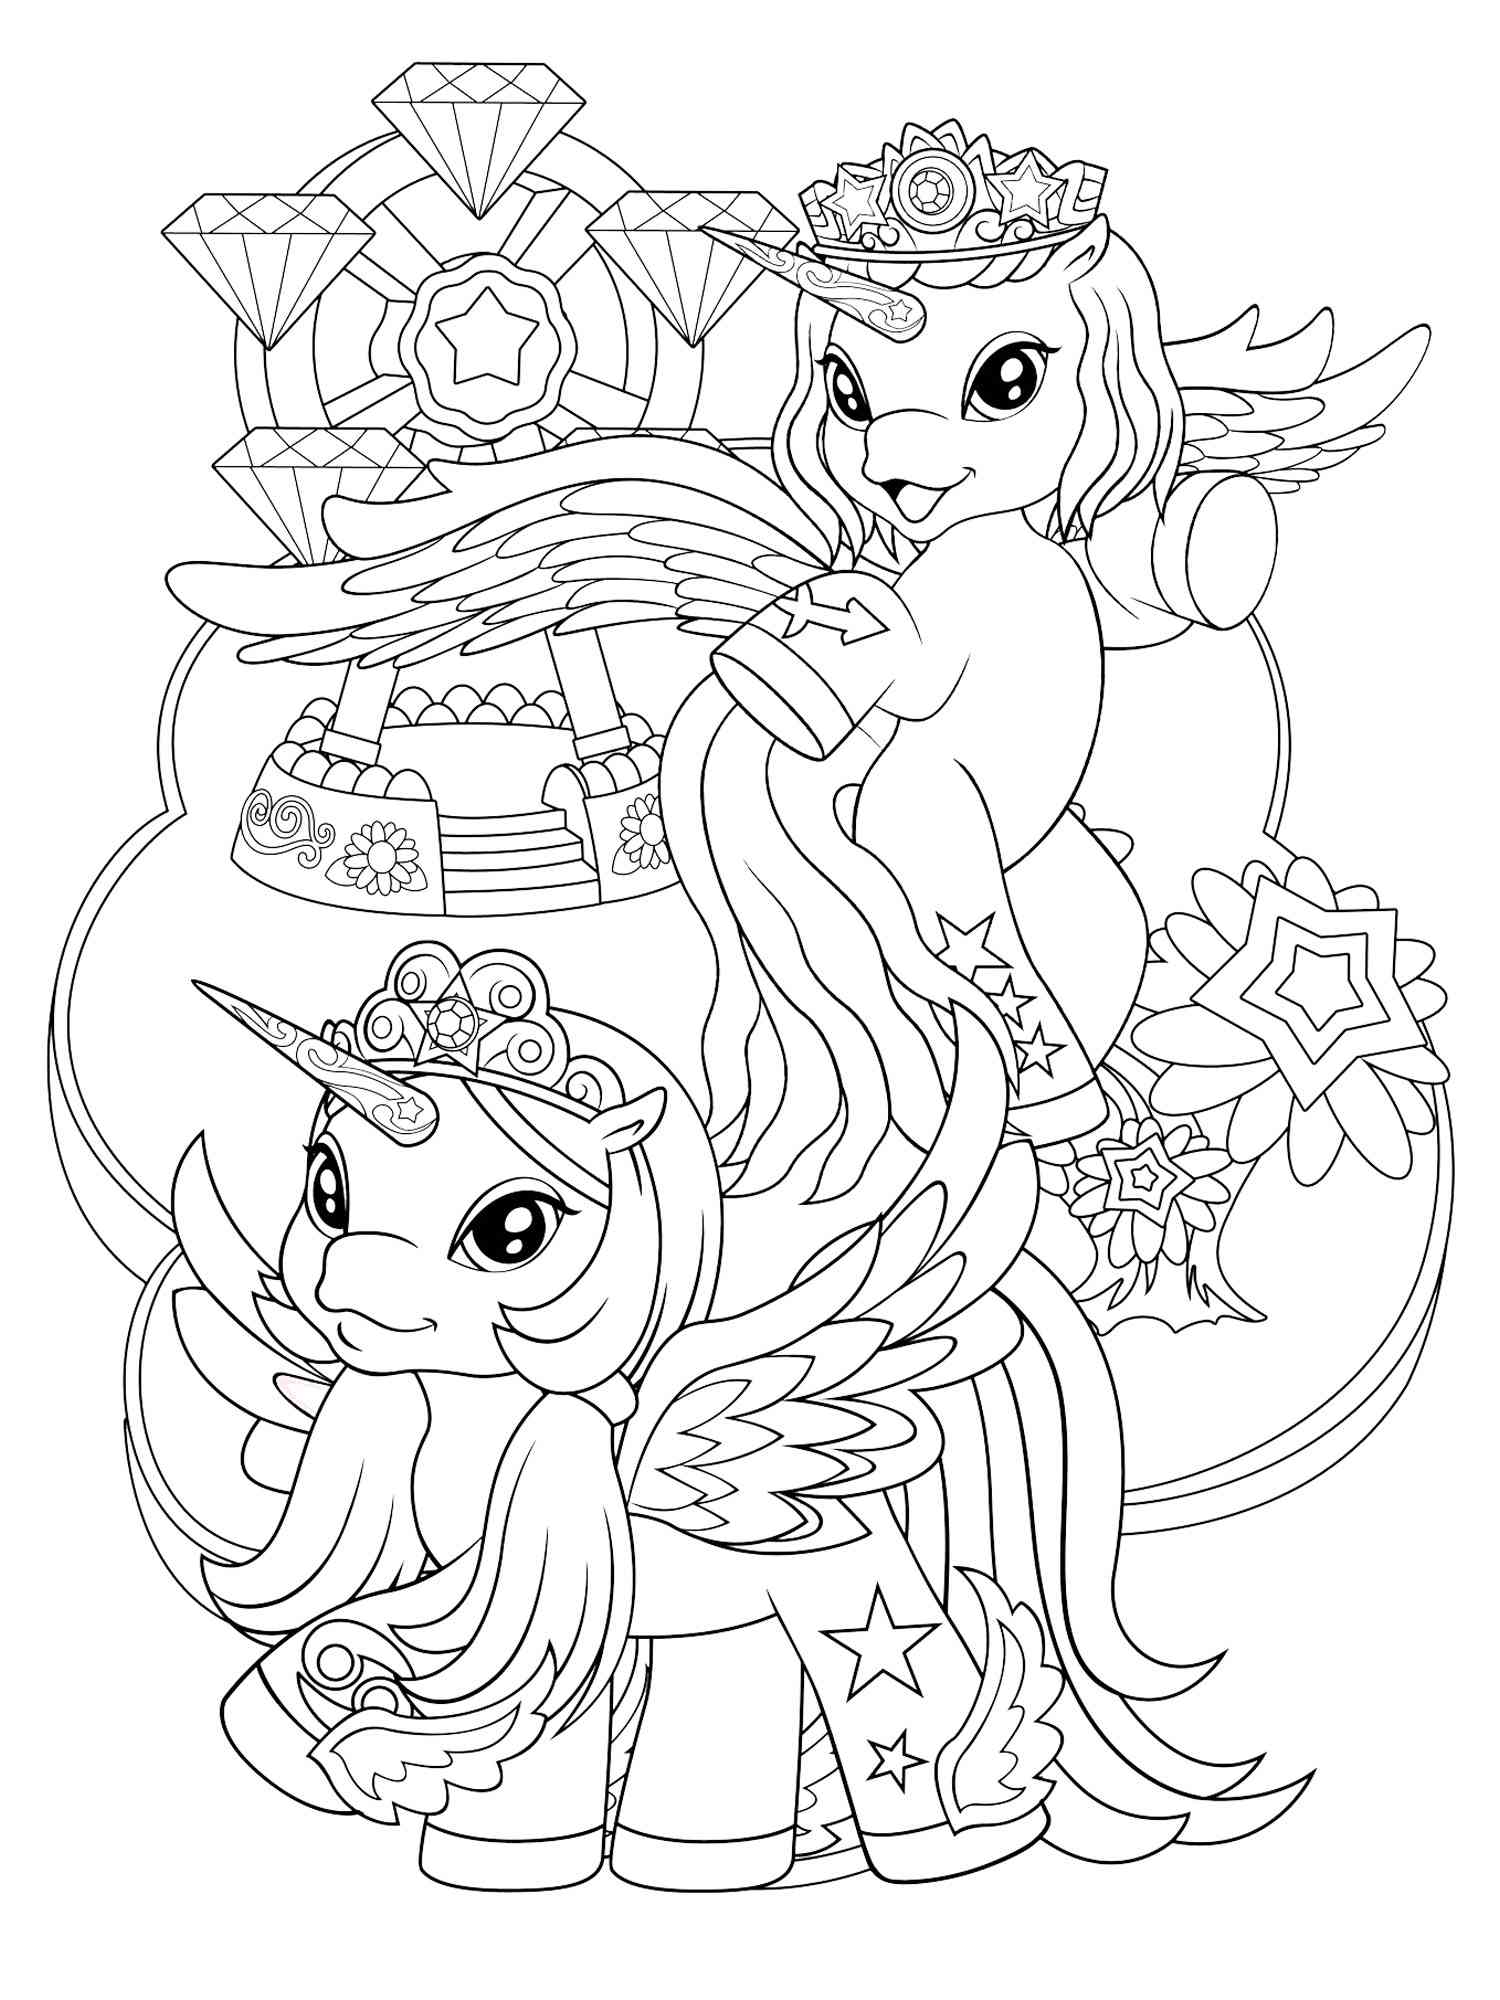 Filly Funtasia 1 coloring page